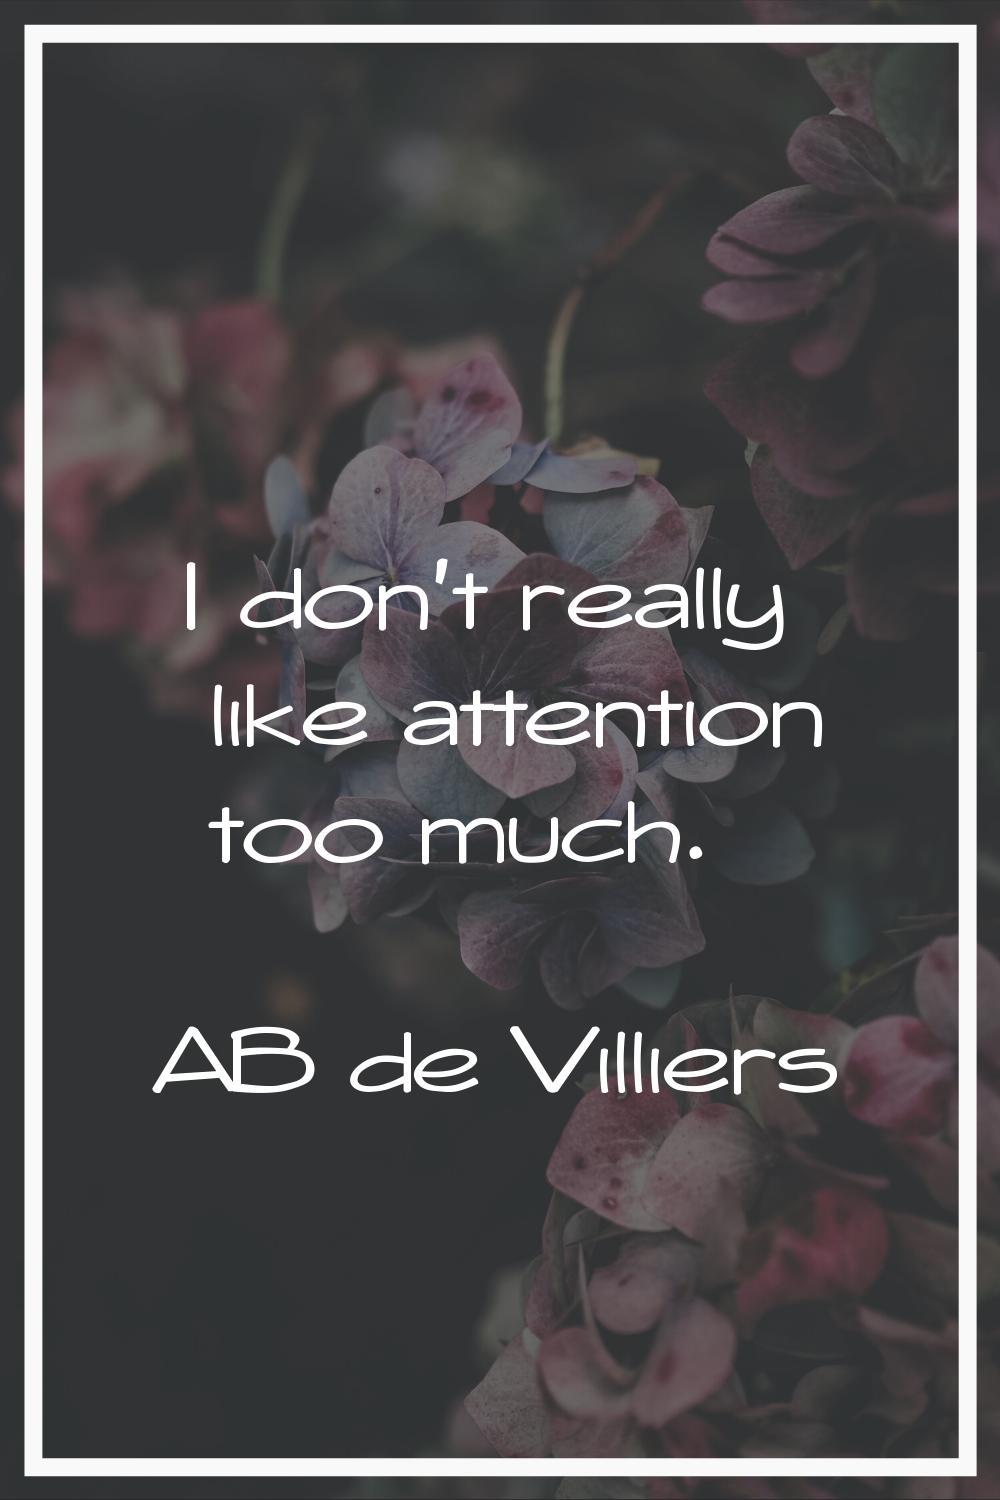 I don't really like attention too much.